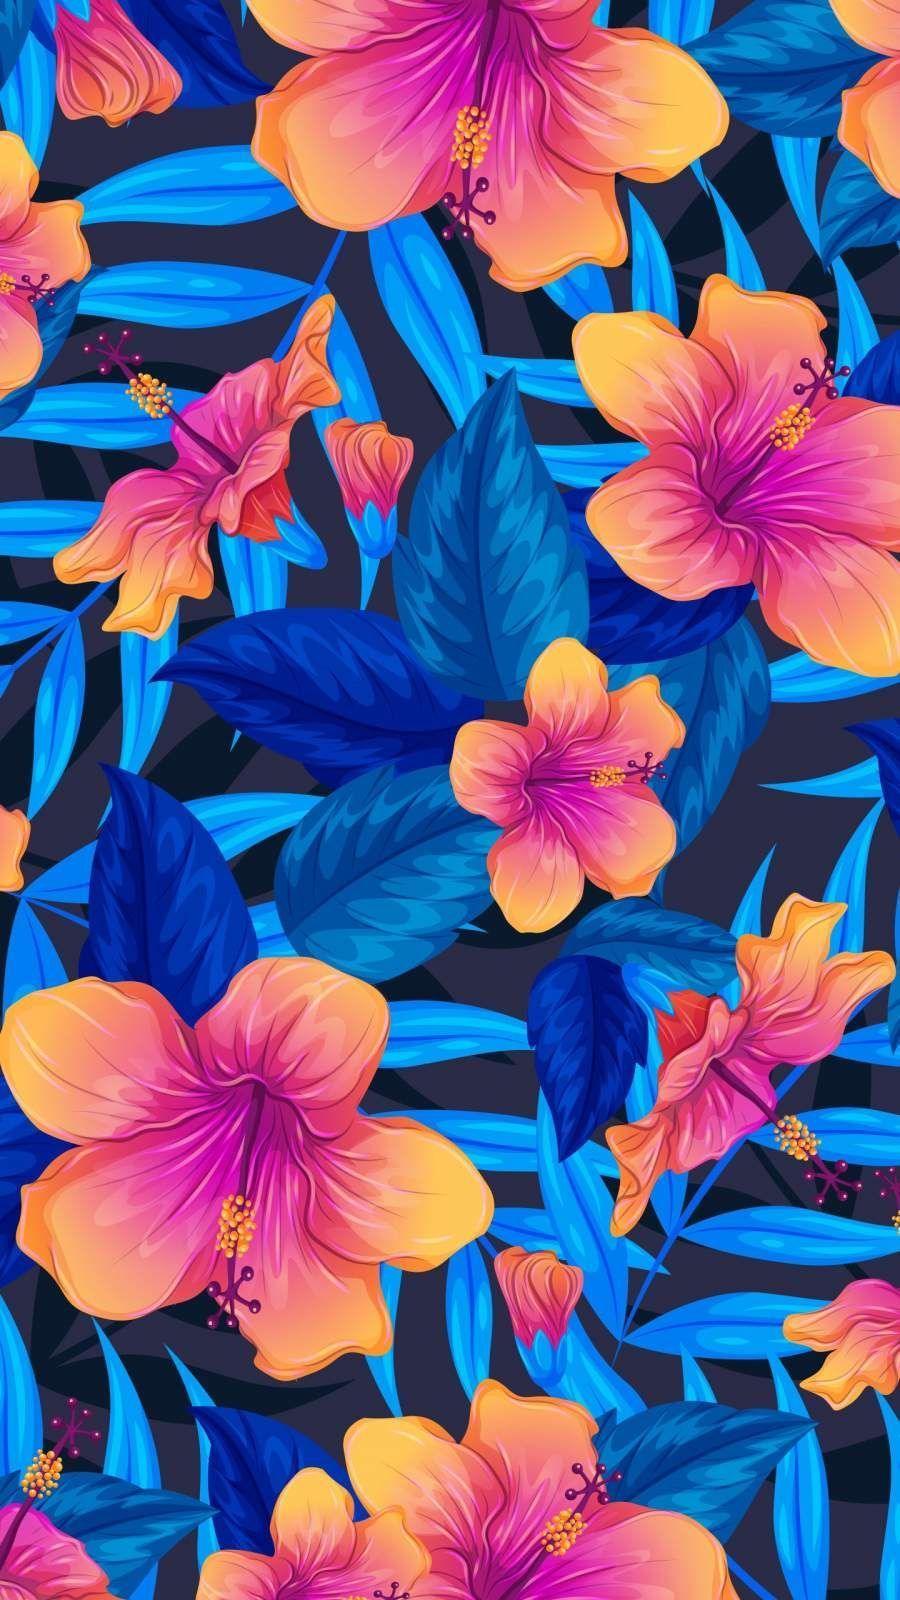 Colorful Flowers iPhone Wallpaper Free Colorful Flowers iPhone Background